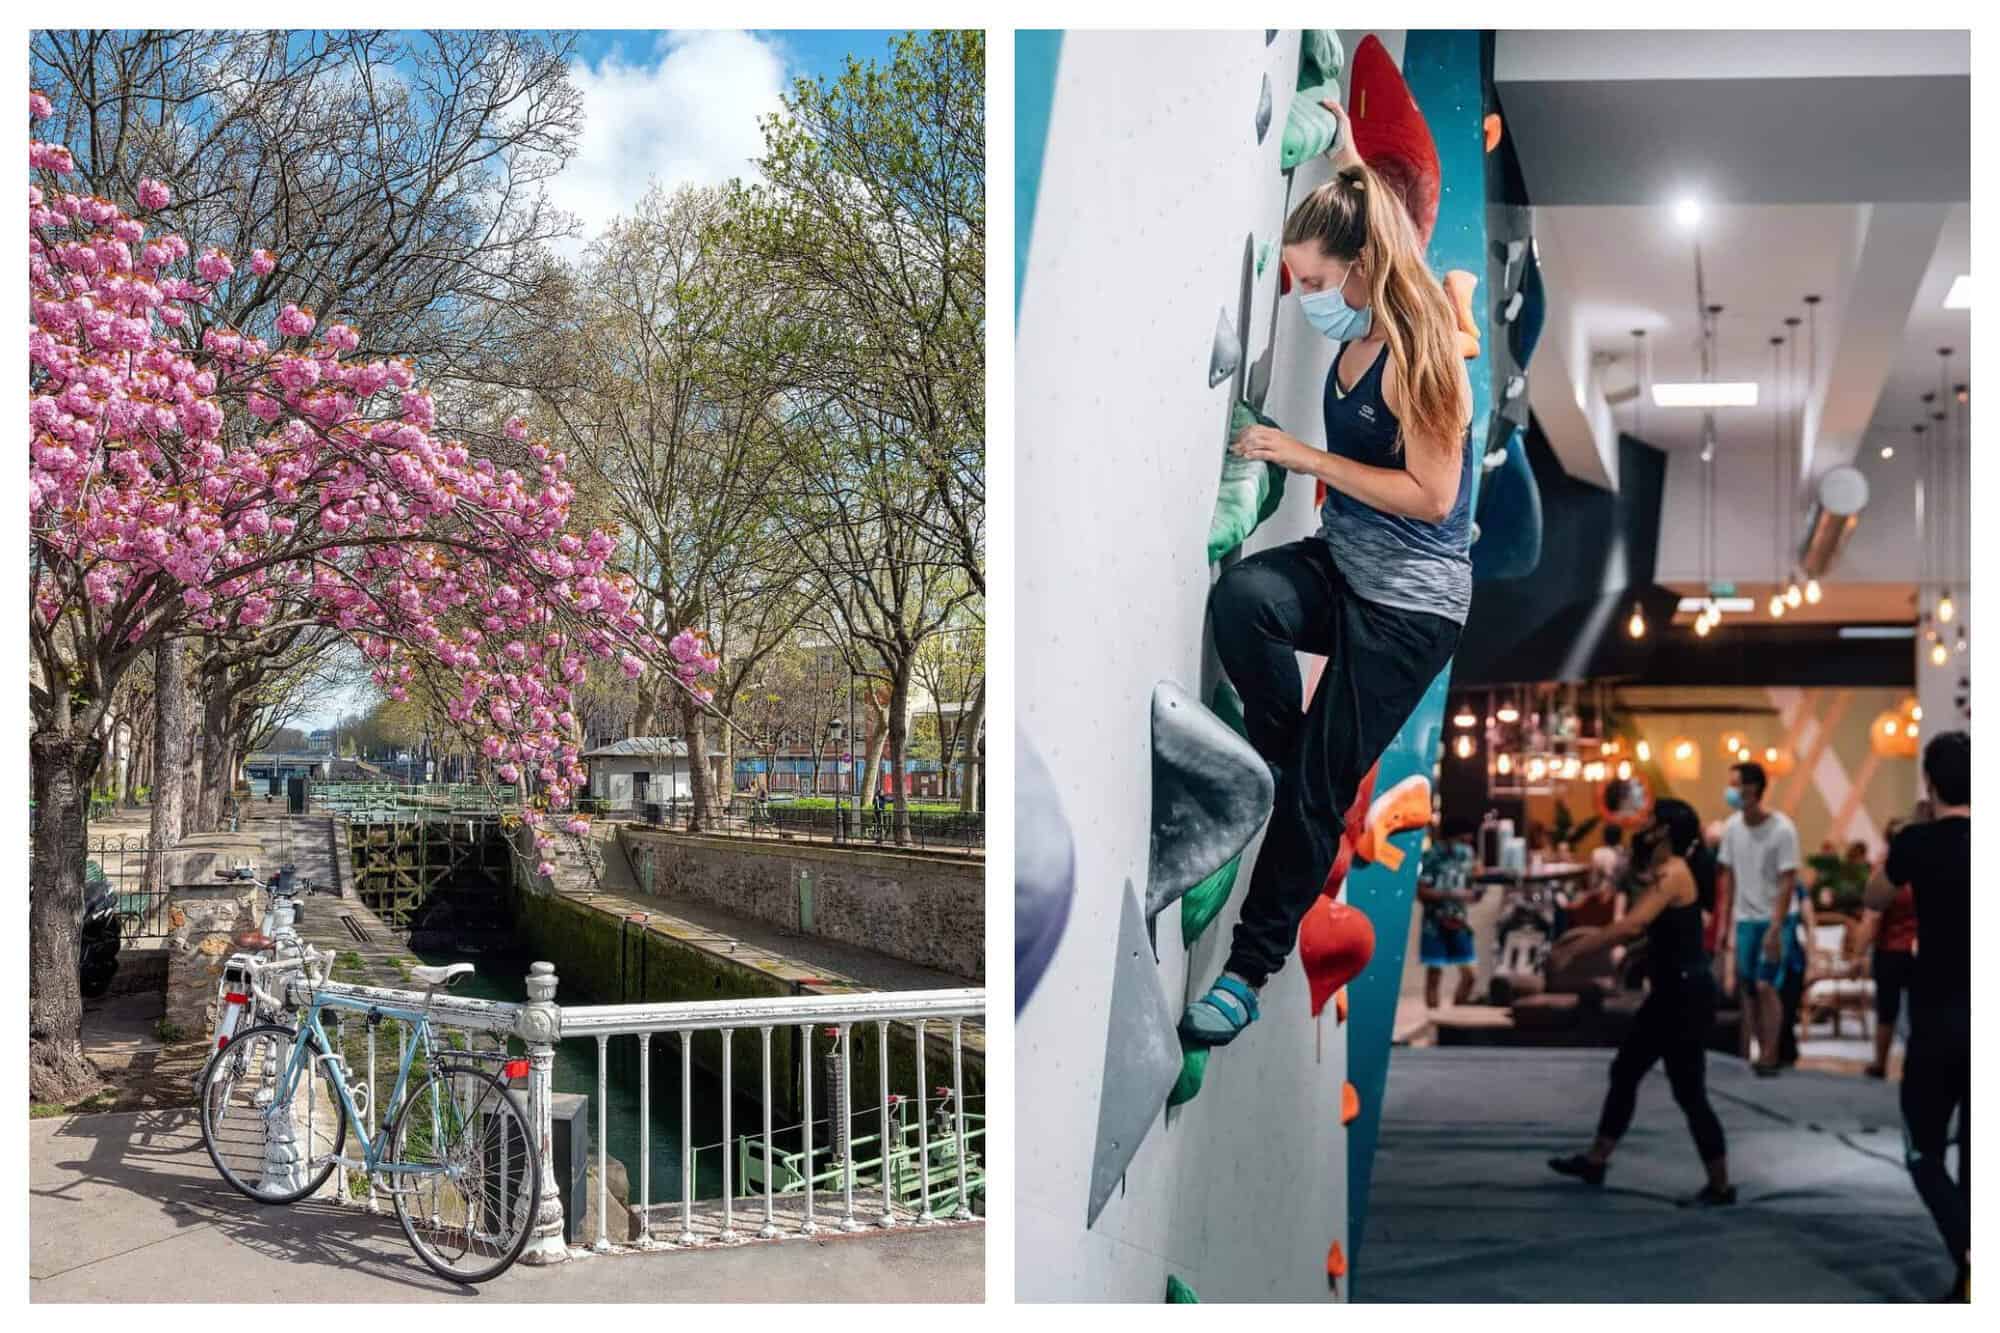 A cherry blossom tree hangs over Canal Saint-Martin and a blue vintage bicycle on a spring day. A young female climber tries out a route in Vertical Art with the busy cafeteria in the background.